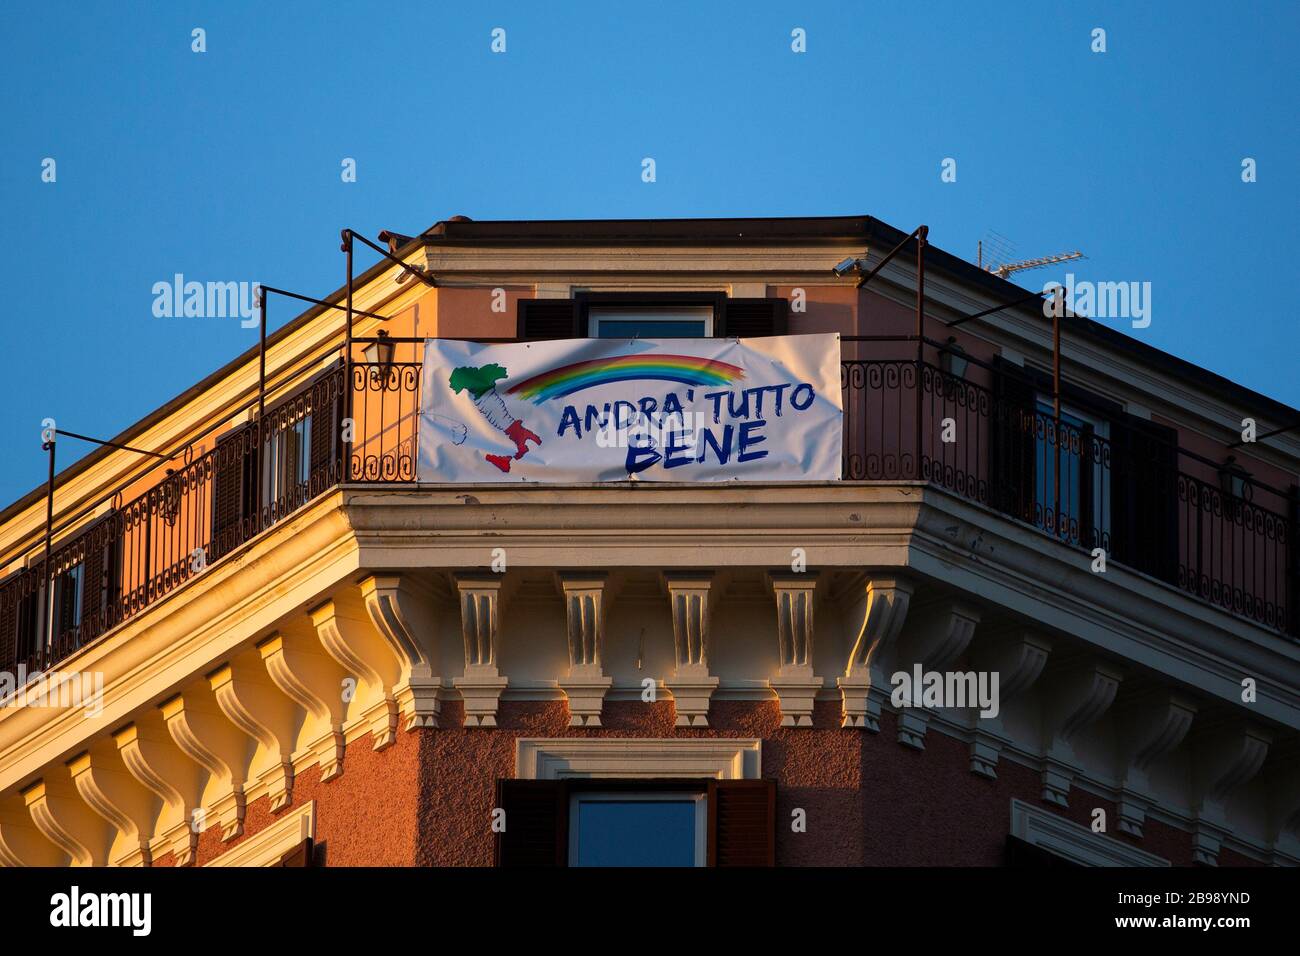 Roma, Italy. 23rd Mar, 2020. A banner with written “everything will be all right” on a building in Rome during the 14th day of lockdown imposed nationwide by the Italian government that tries to tackle the coronavirus outbreak. Every movements in the citiies are restricted, and streets usually filled with life and traffic are almost empty (Photo by Giuseppe Fama/Pacific Press) Credit: Pacific Press Agency/Alamy Live News Stock Photo